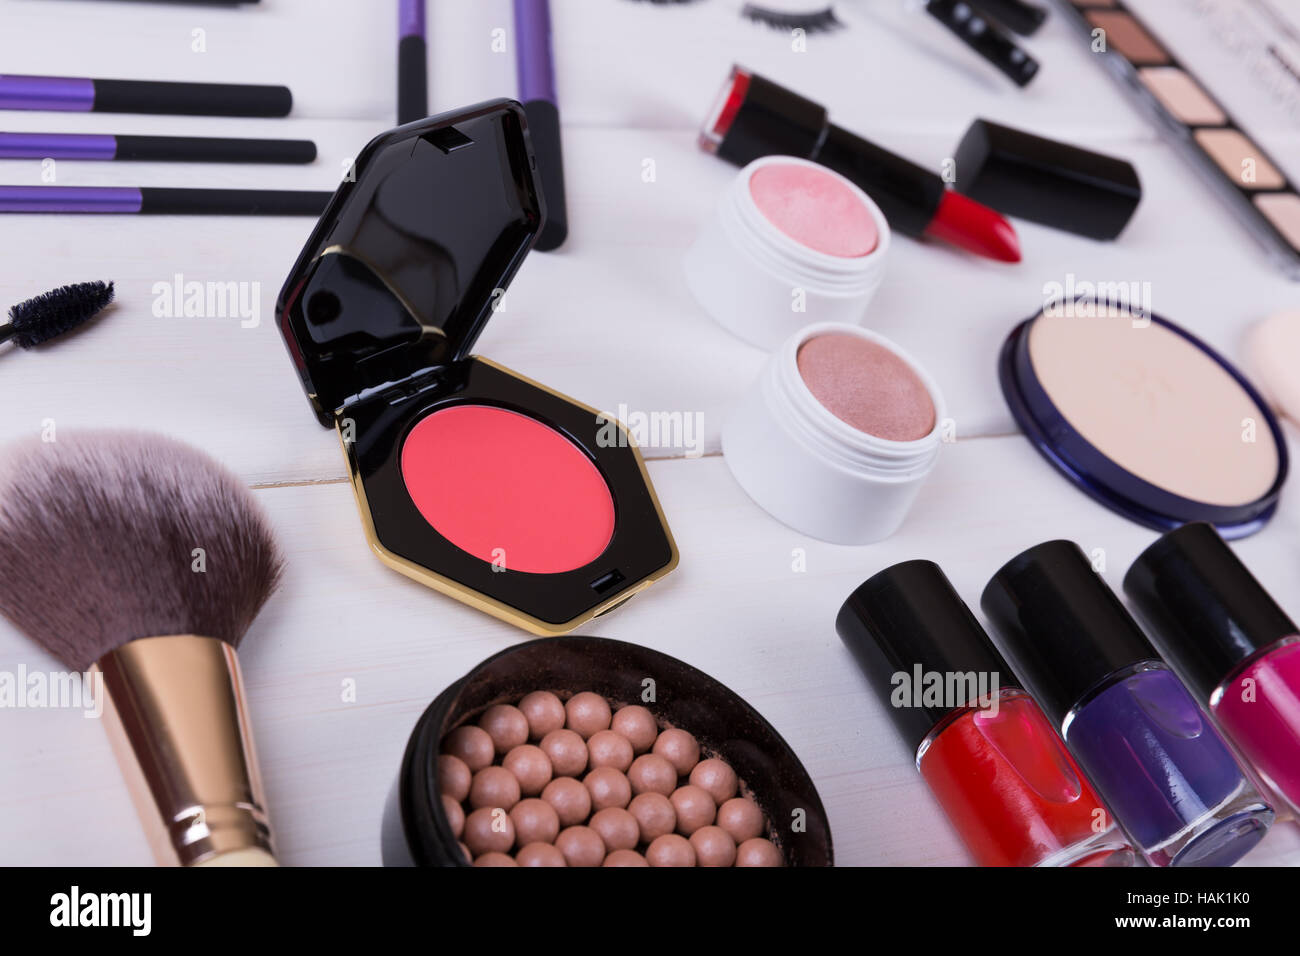 collection of makeup cosmetics products on wooden table Stock Photo